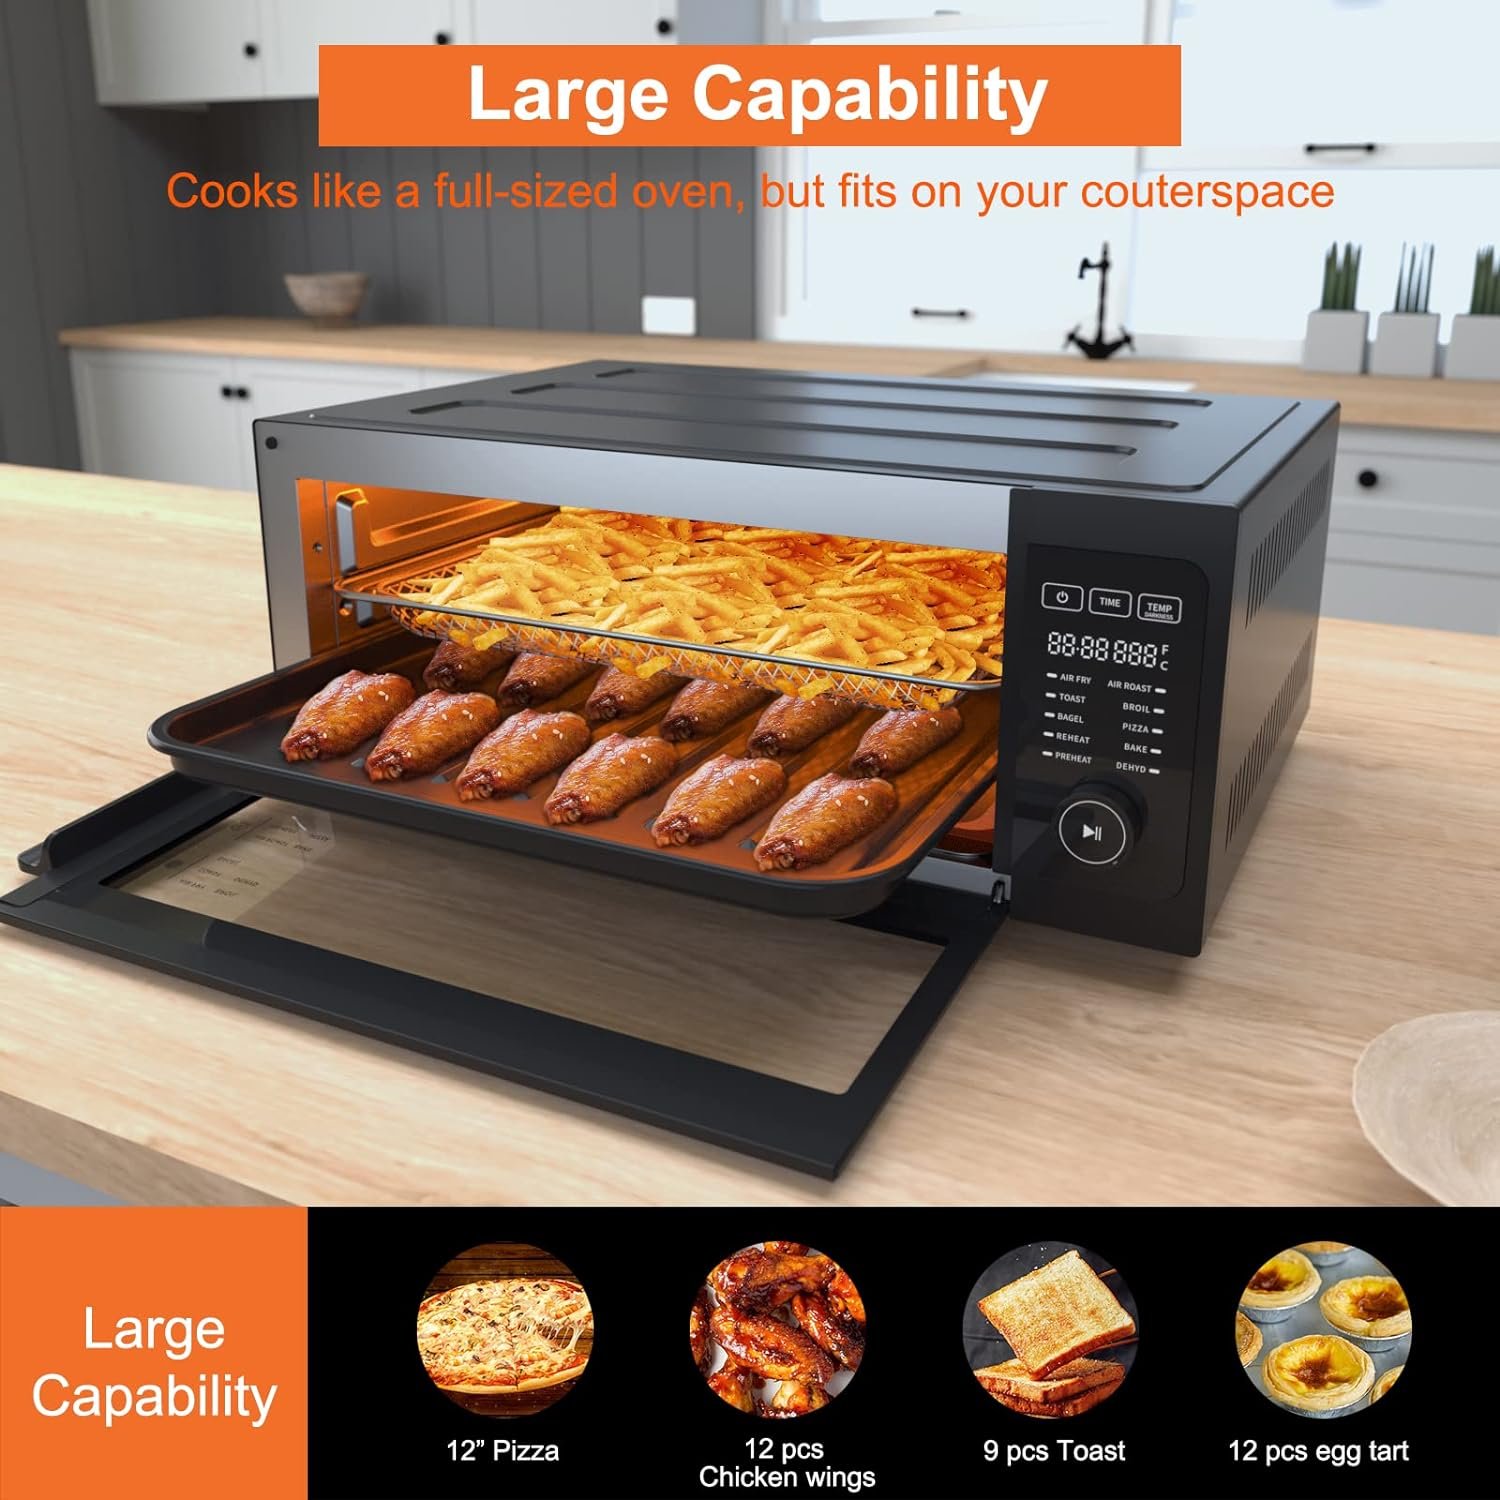 Air Fryer Toaster Oven Combo - Fabuletta 10-in-1 Countertop Convection Oven 1800W, Flip Up  Away Capability for Storage Space, Oil-Less Air Fryer Oven Fit 12 Pizza, 9 Slices Toast, 5 Accessories